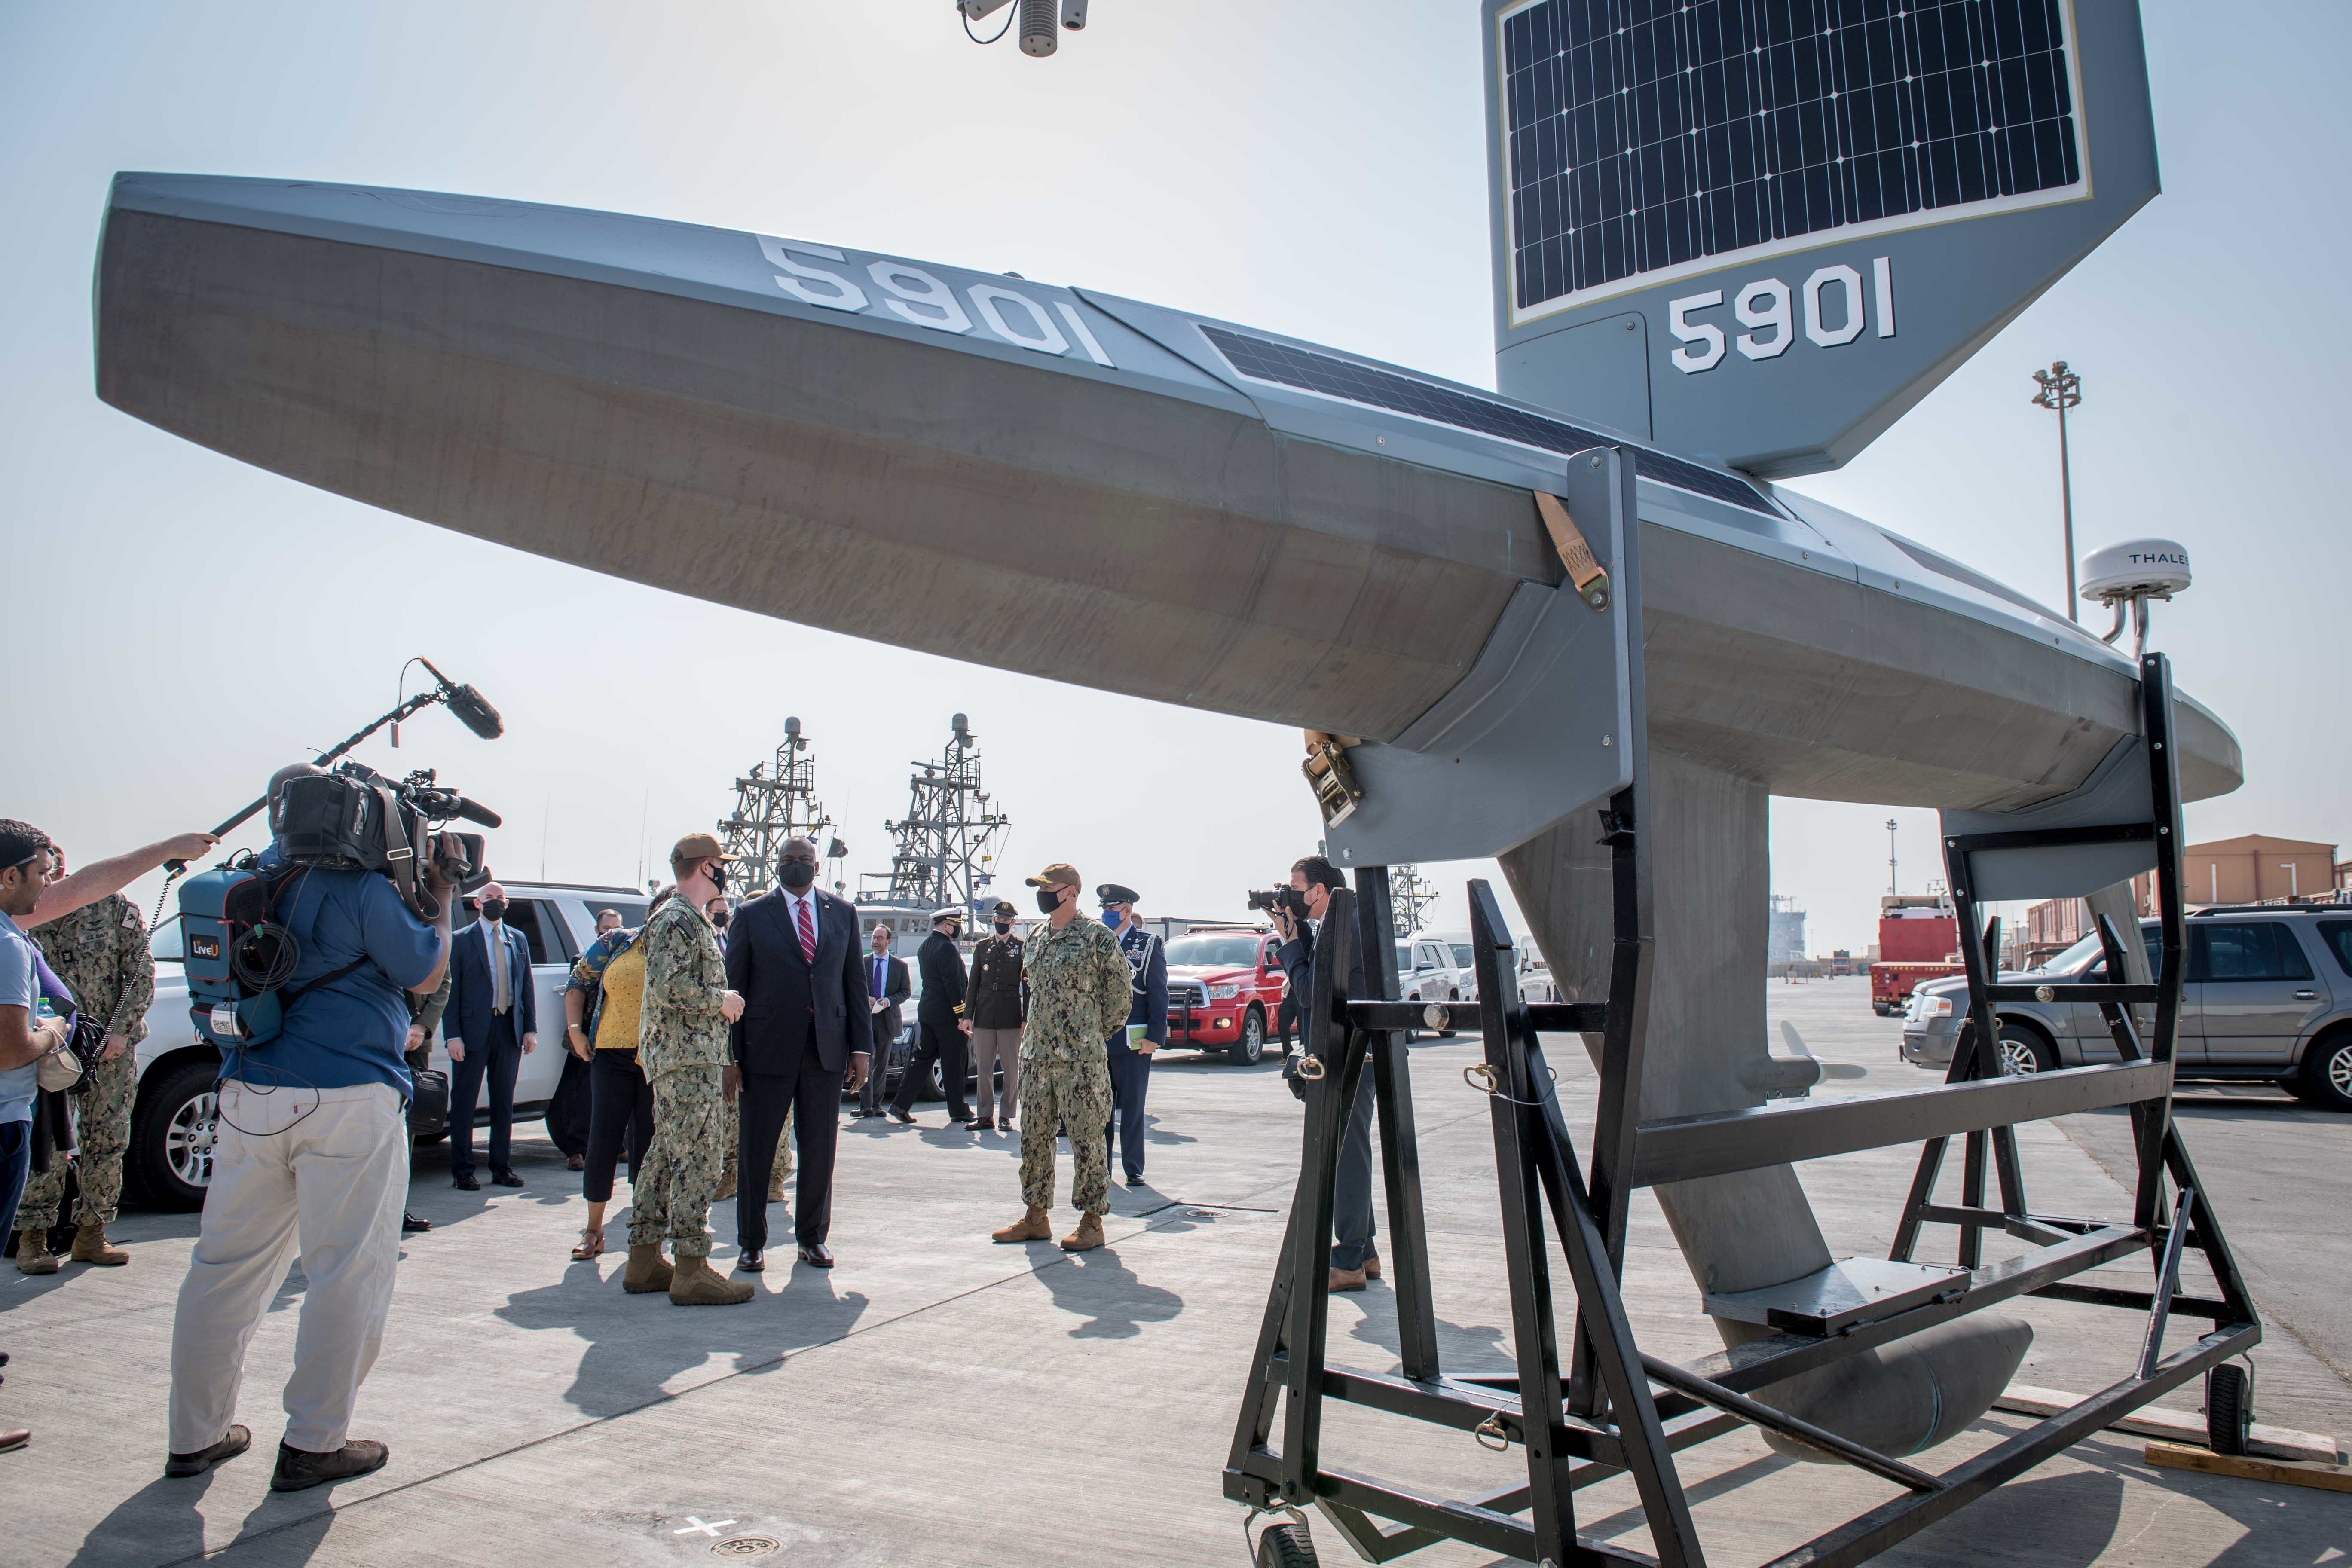 Task Force 59: The future of the Navy's unmanned systems or a one